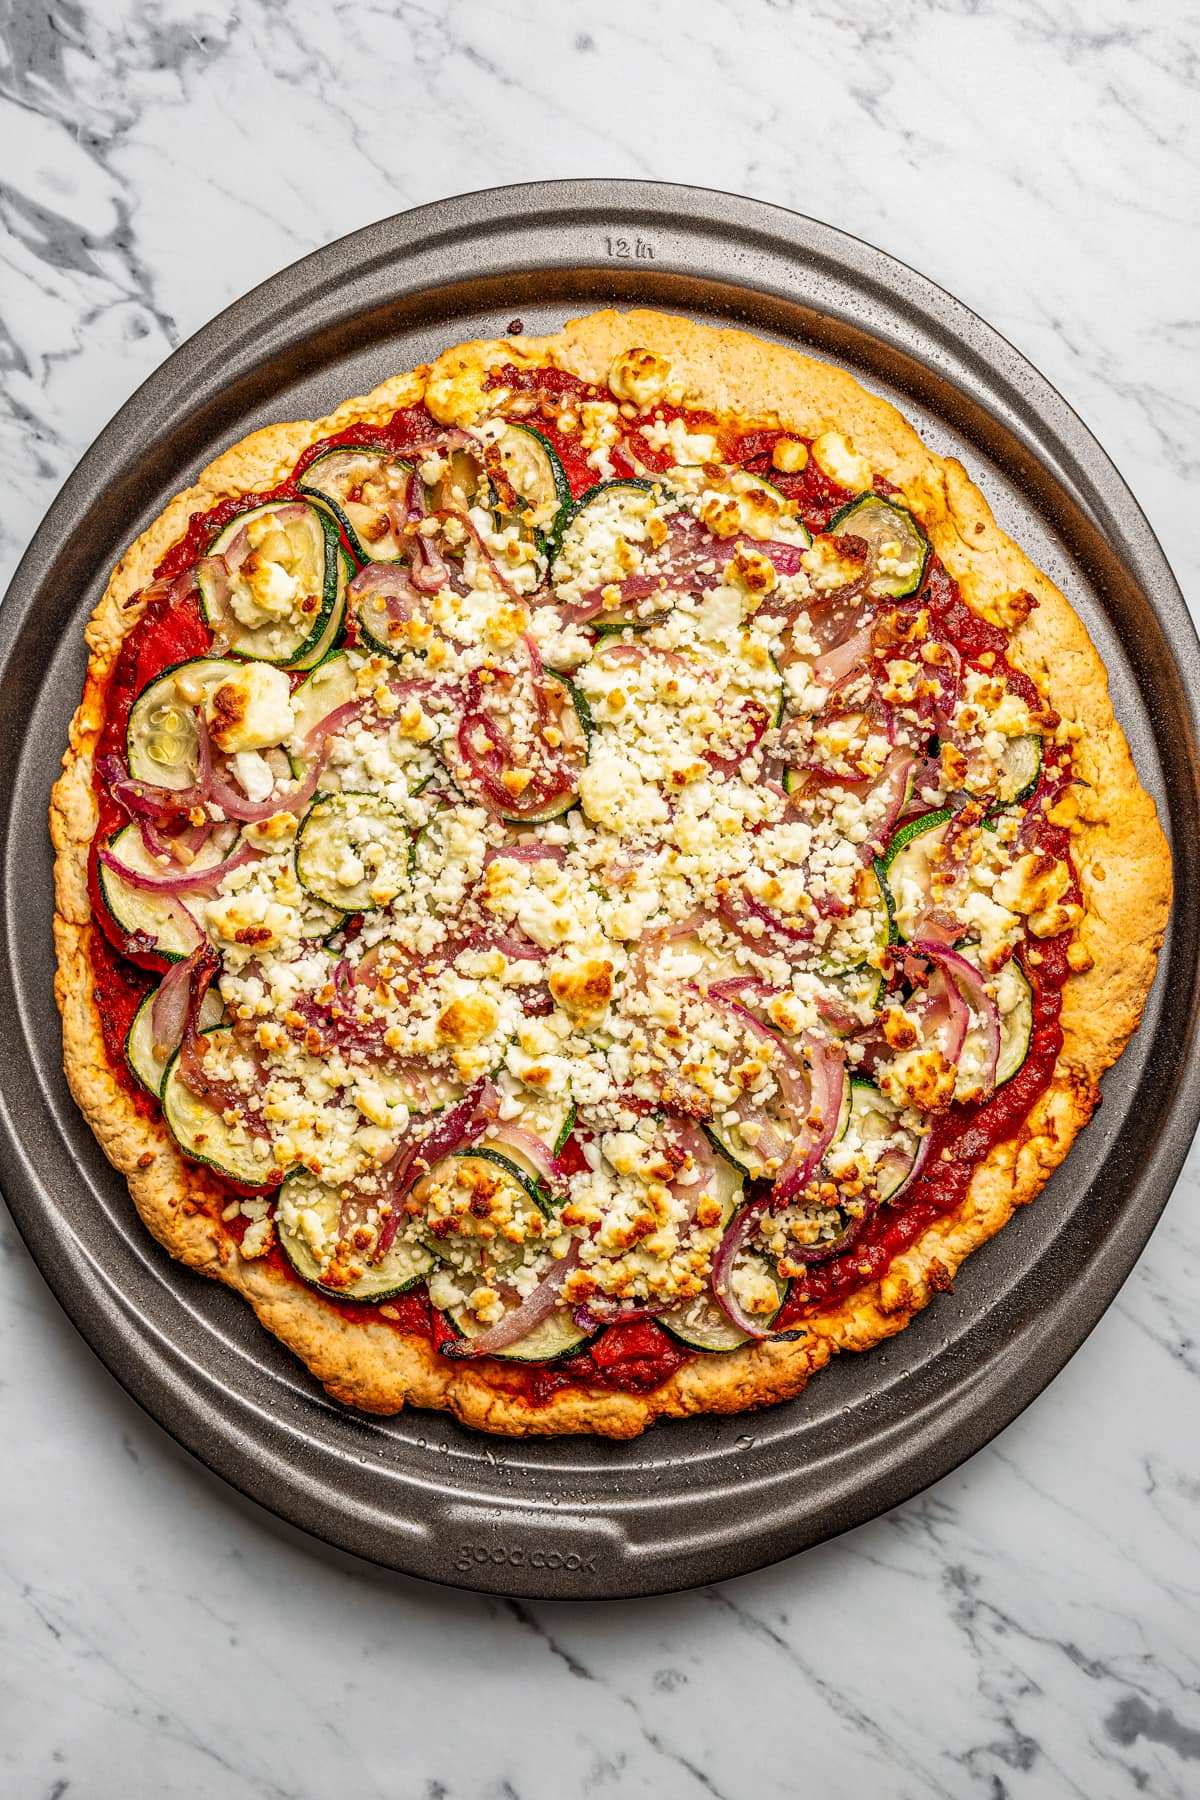 Baked zucchini goat cheese pizza placed on a baking sheet.